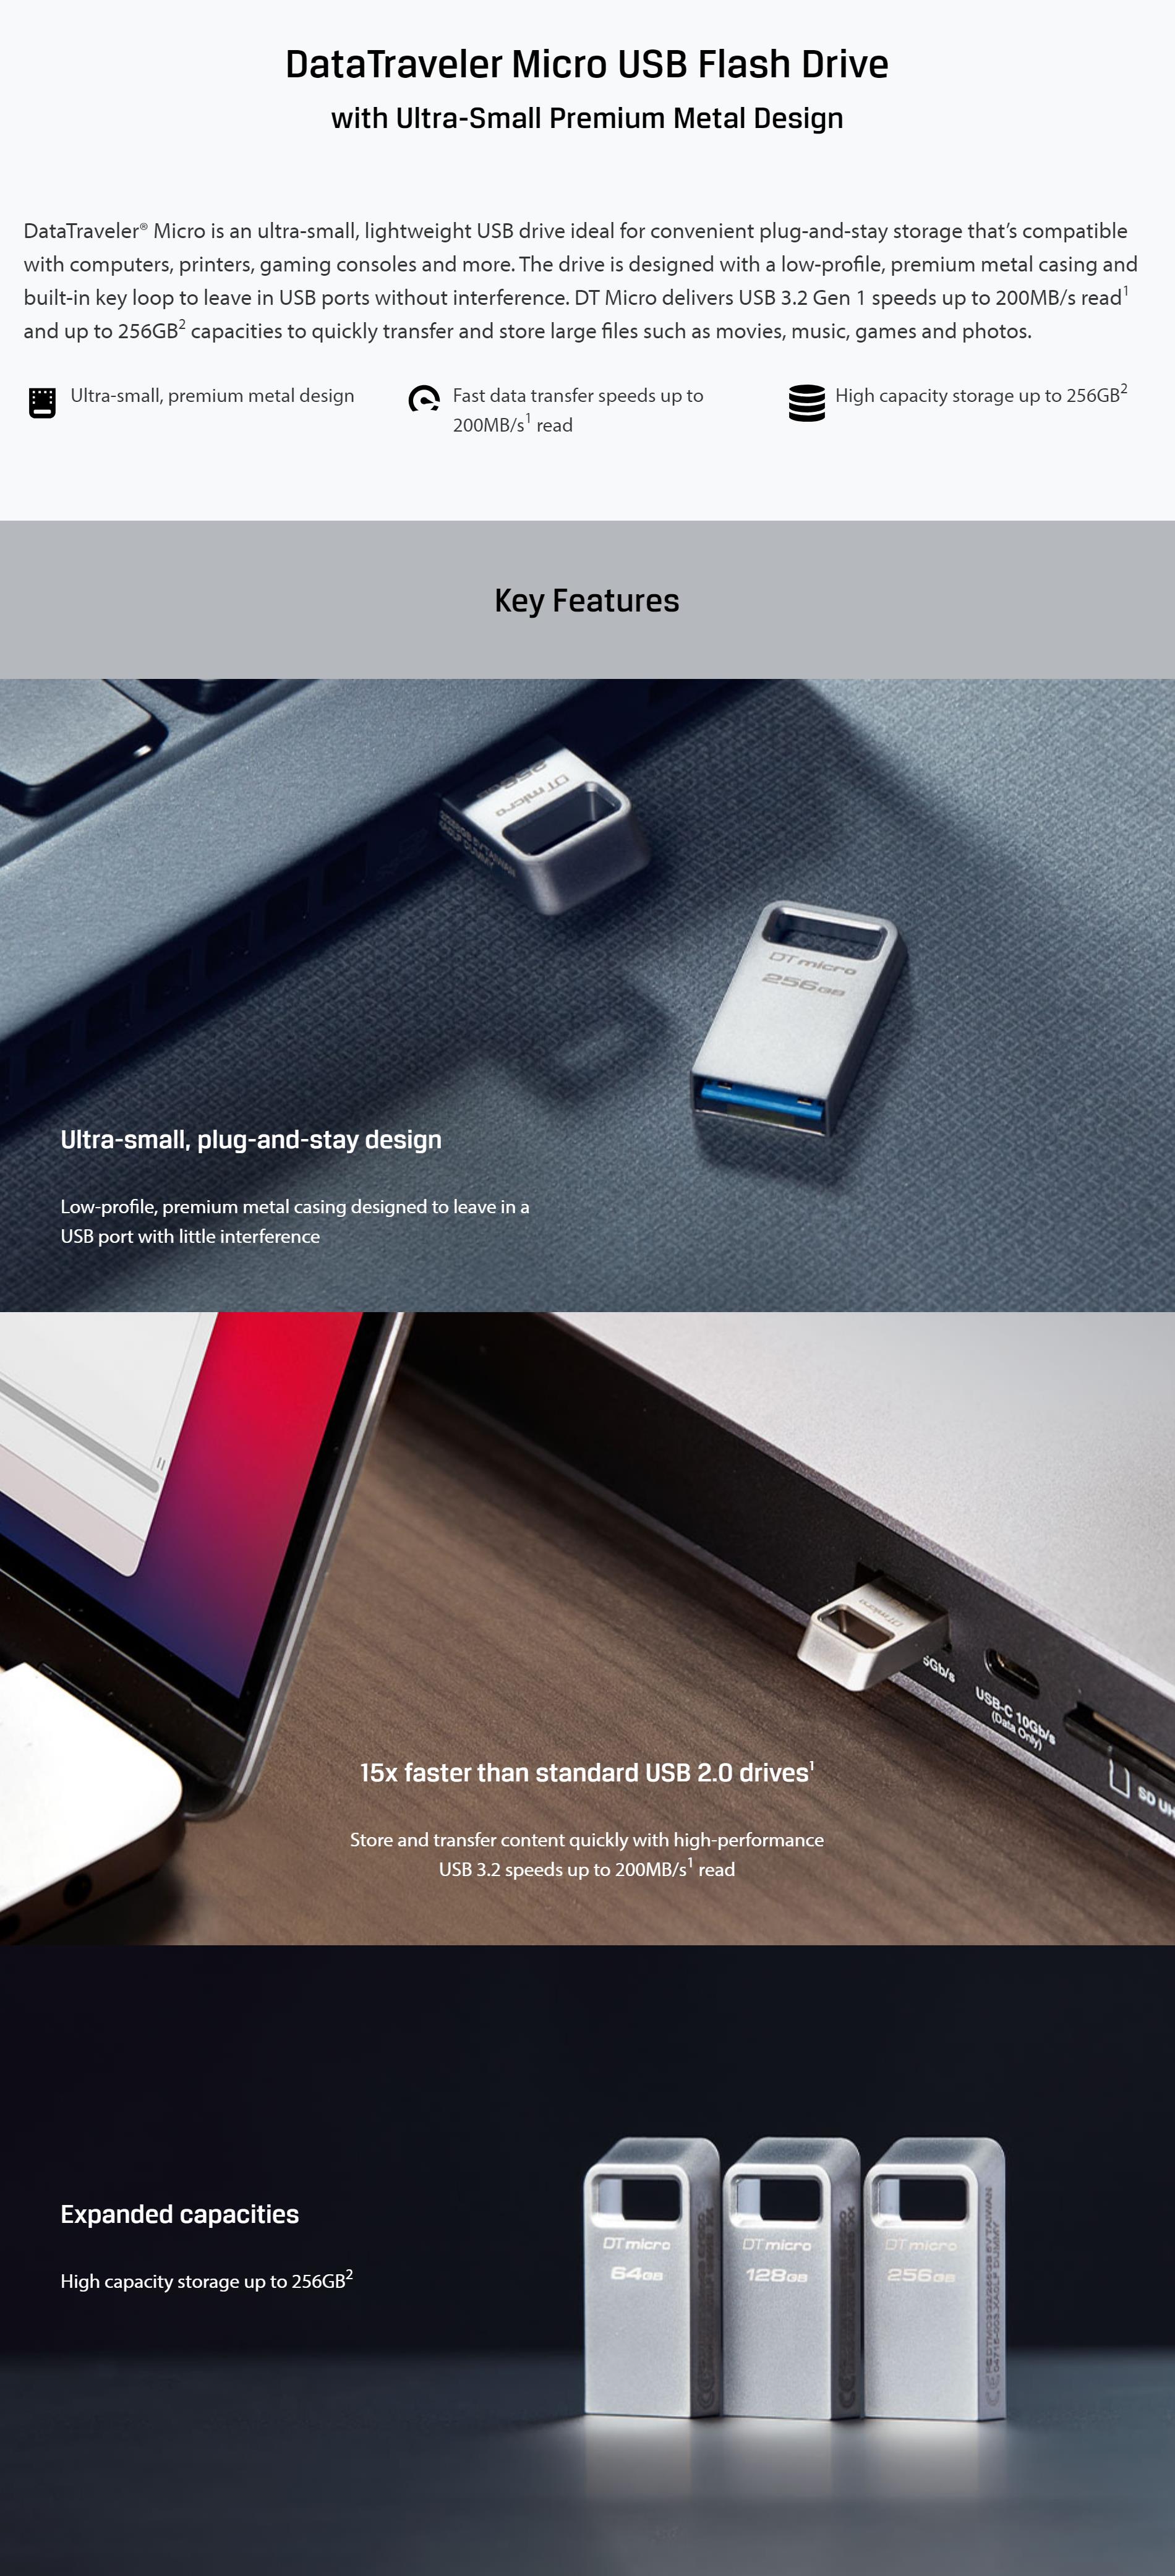 A large marketing image providing additional information about the product Kingston DataTraveler Micro USB 3.2 256GB Flash Drive - Additional alt info not provided